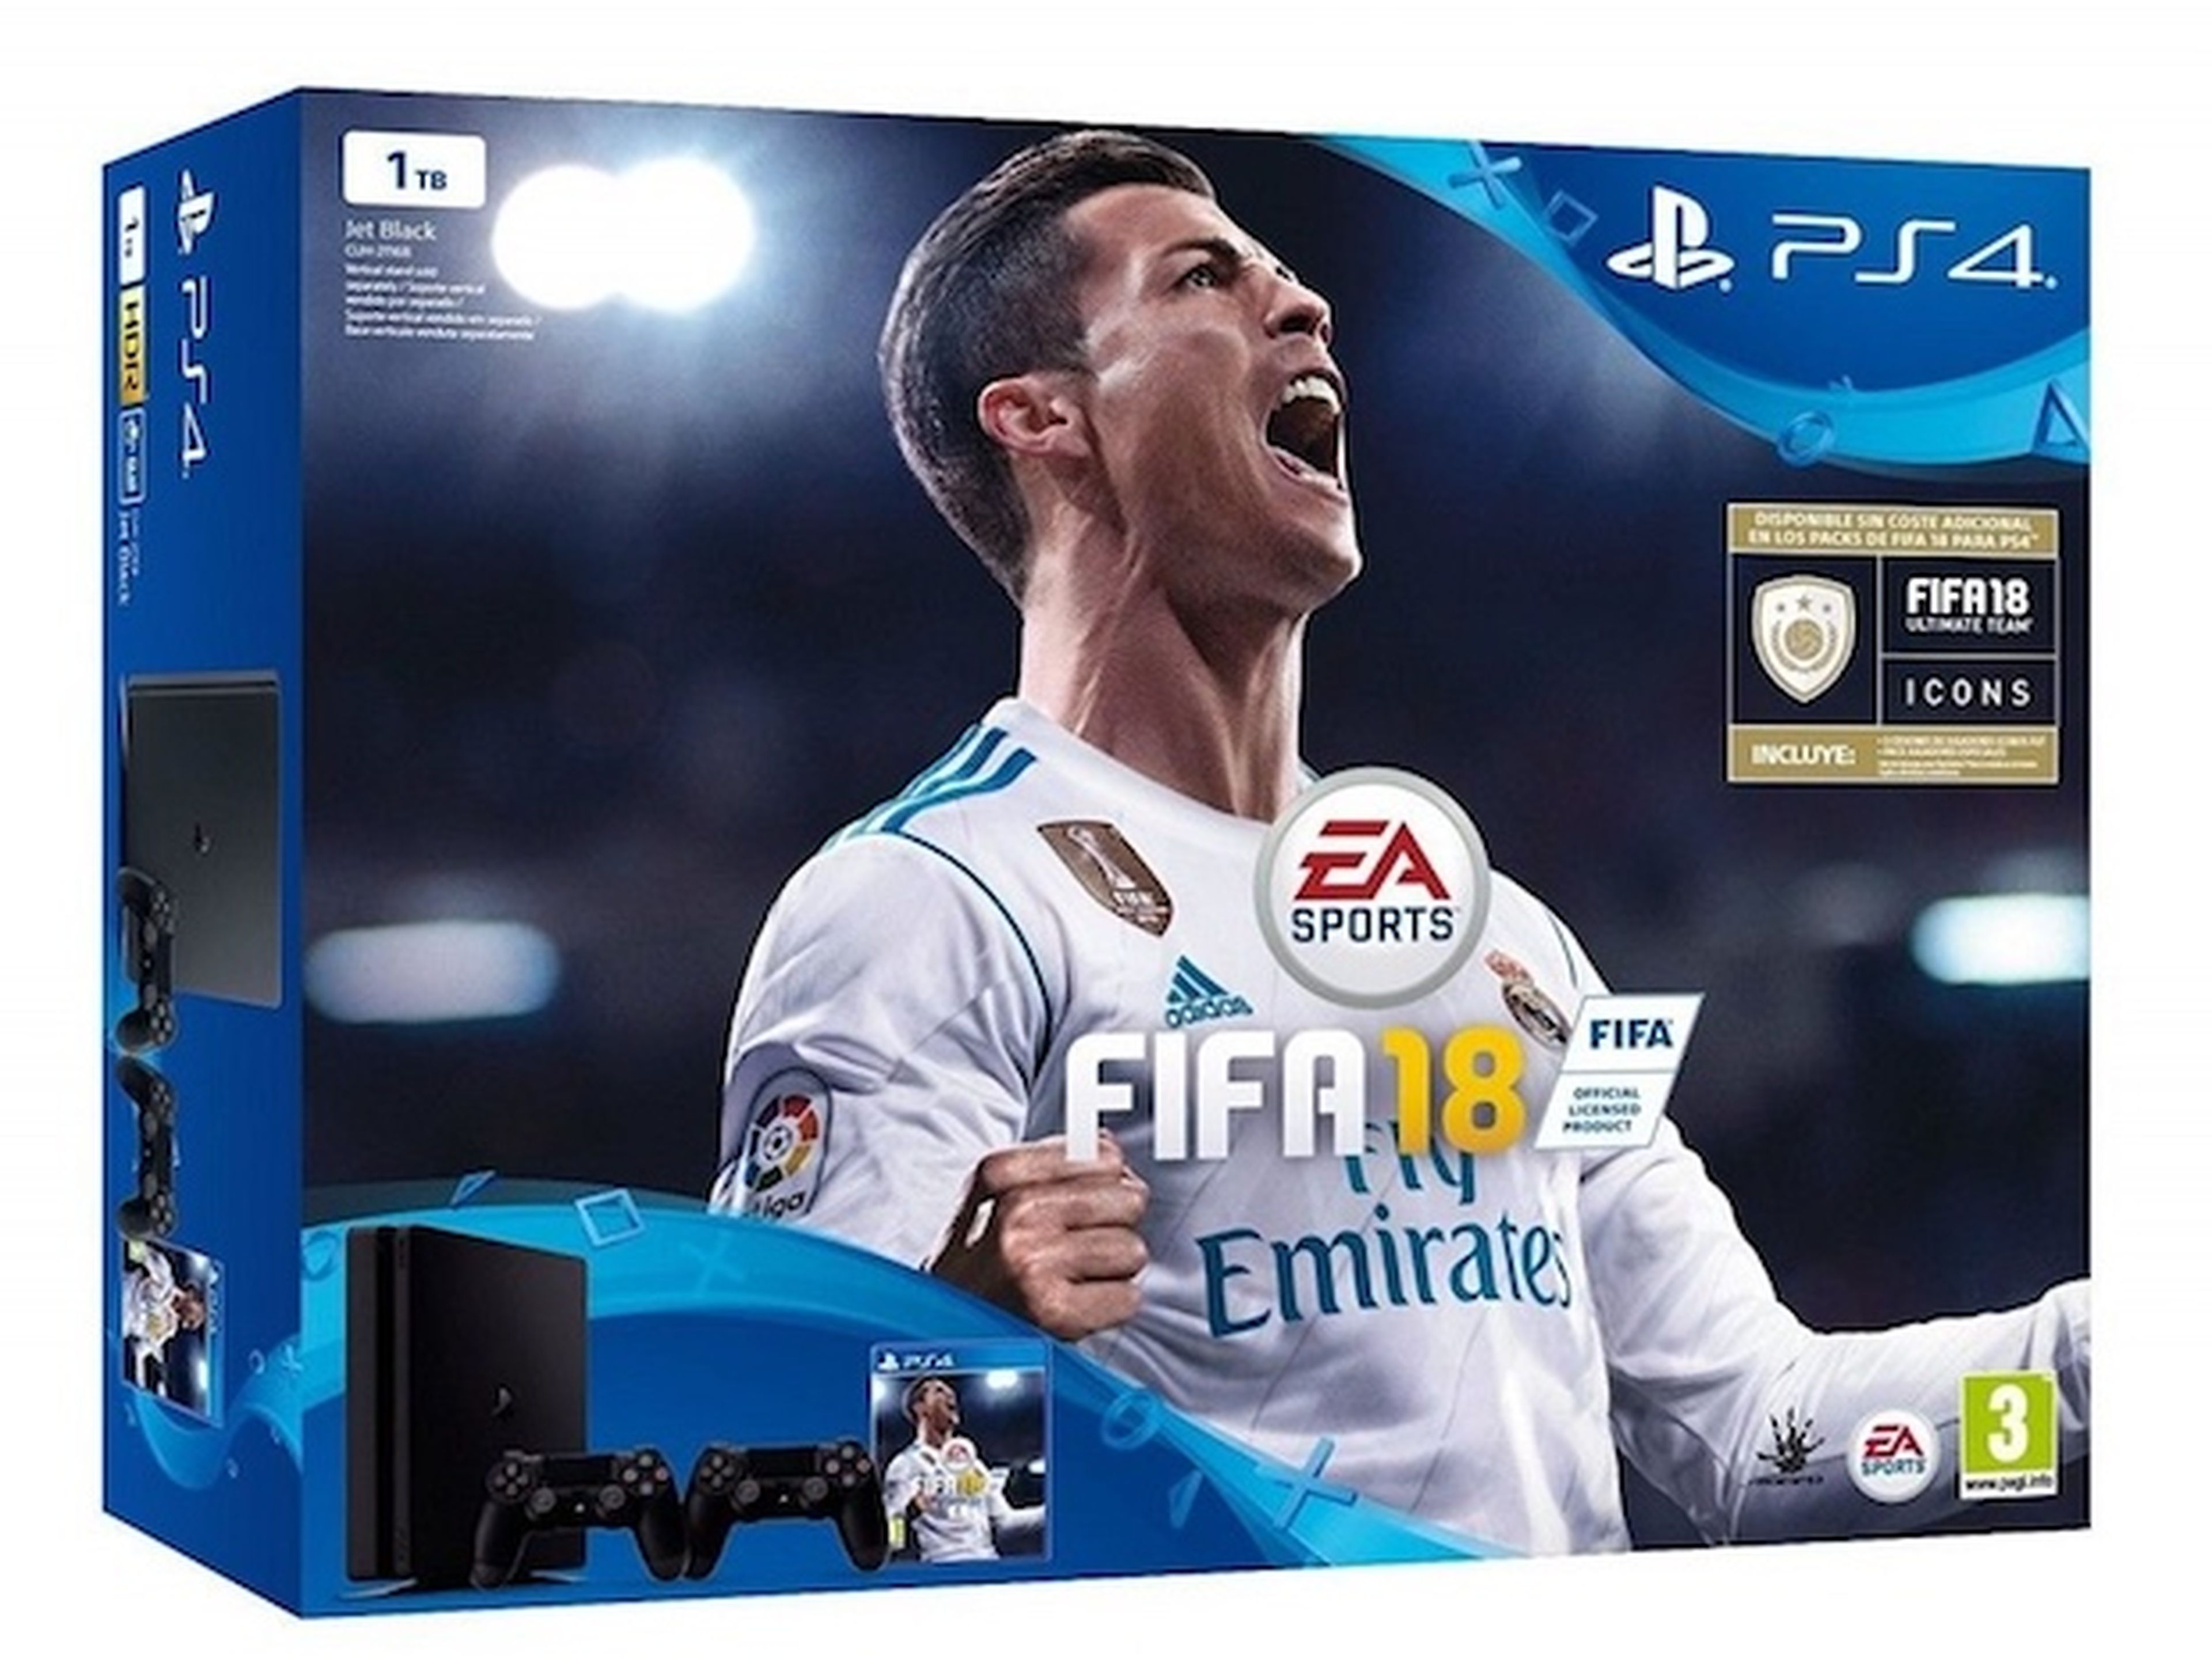 PS4 Pack FIFA 18